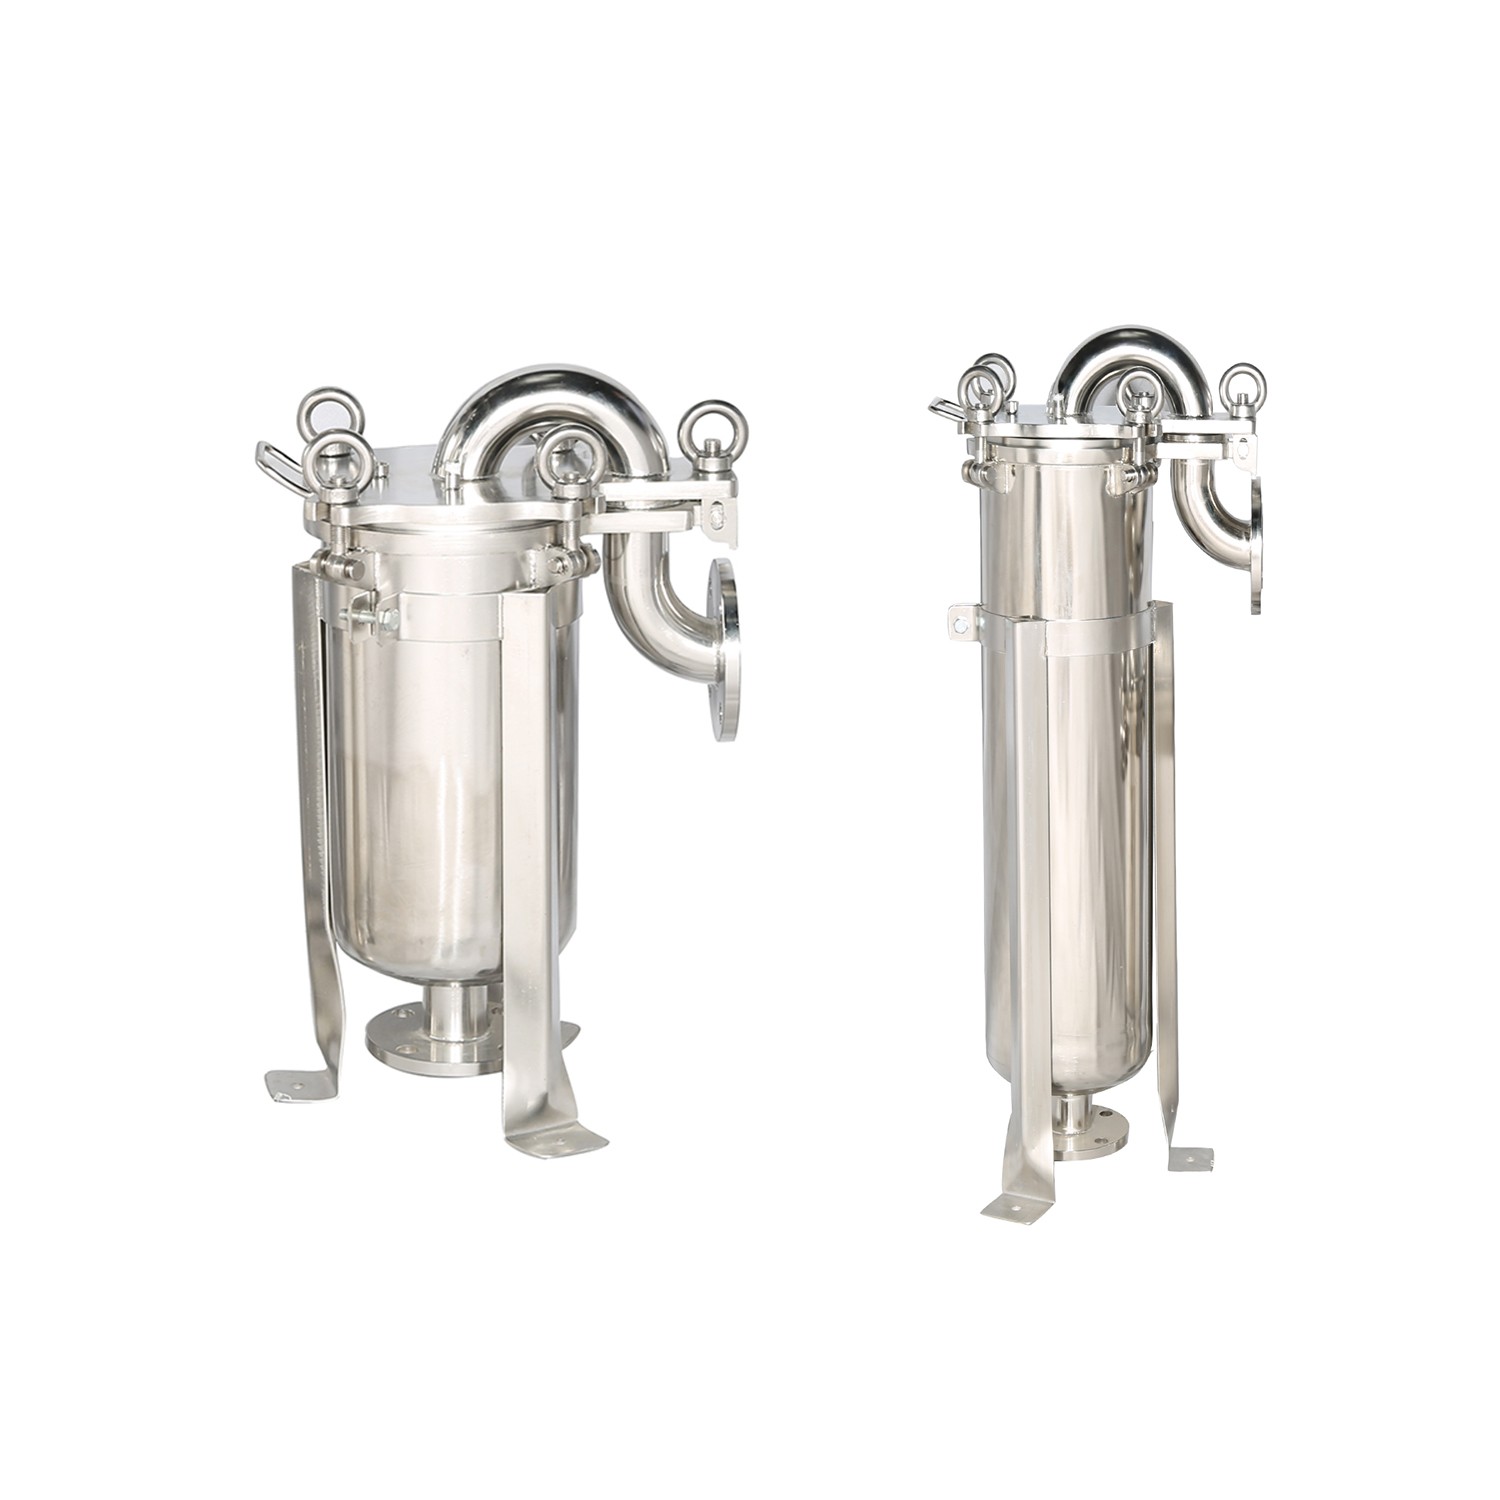 Lvyuan titanium stainless water filter housing manufacturer for food and beverage